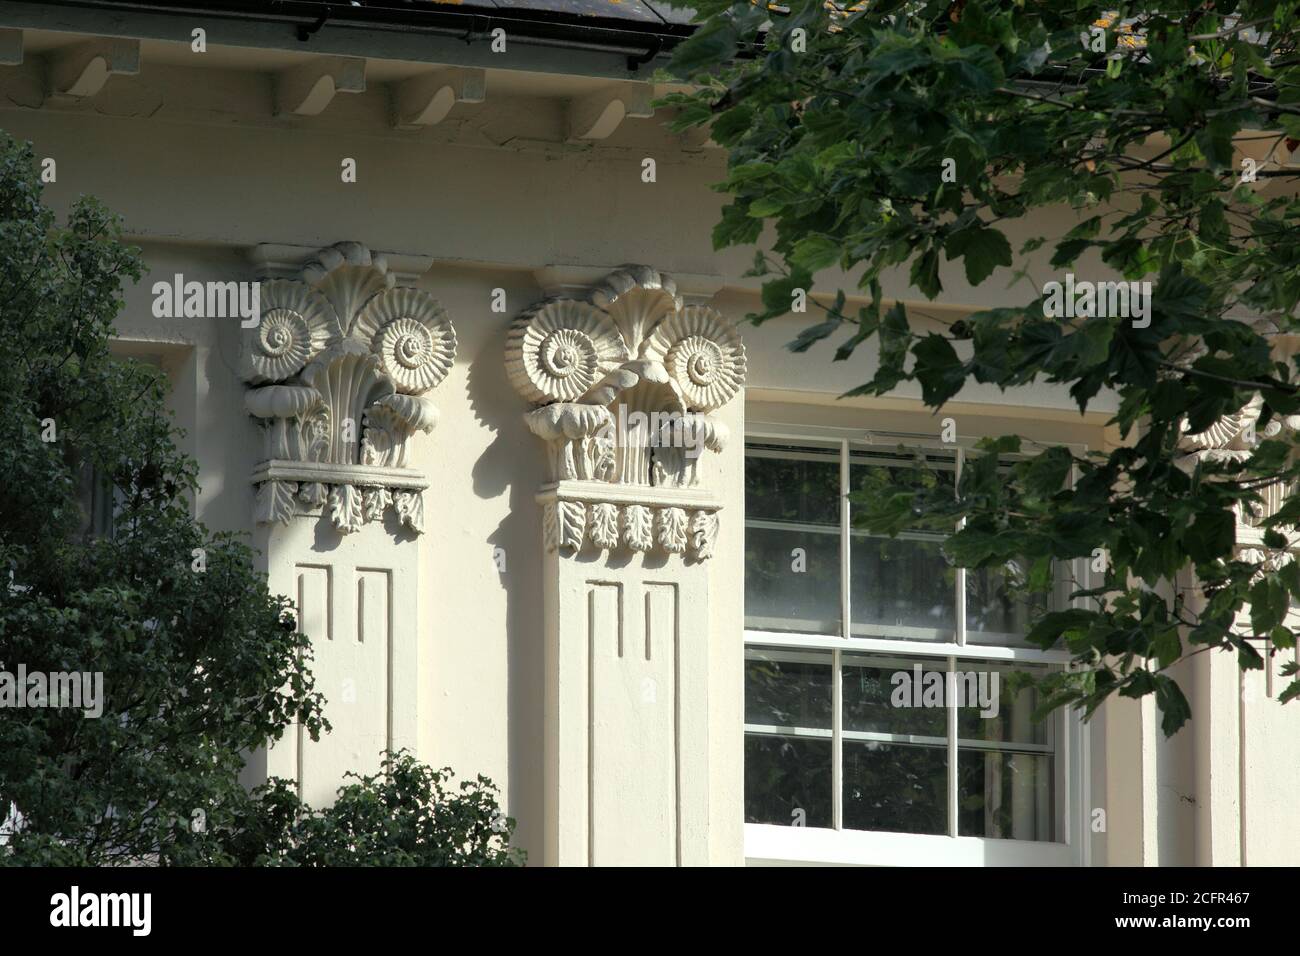 Ammonite capitals on a building designed by architect Amon Wilds, in Richmond Terrace, Brighton. Stock Photo